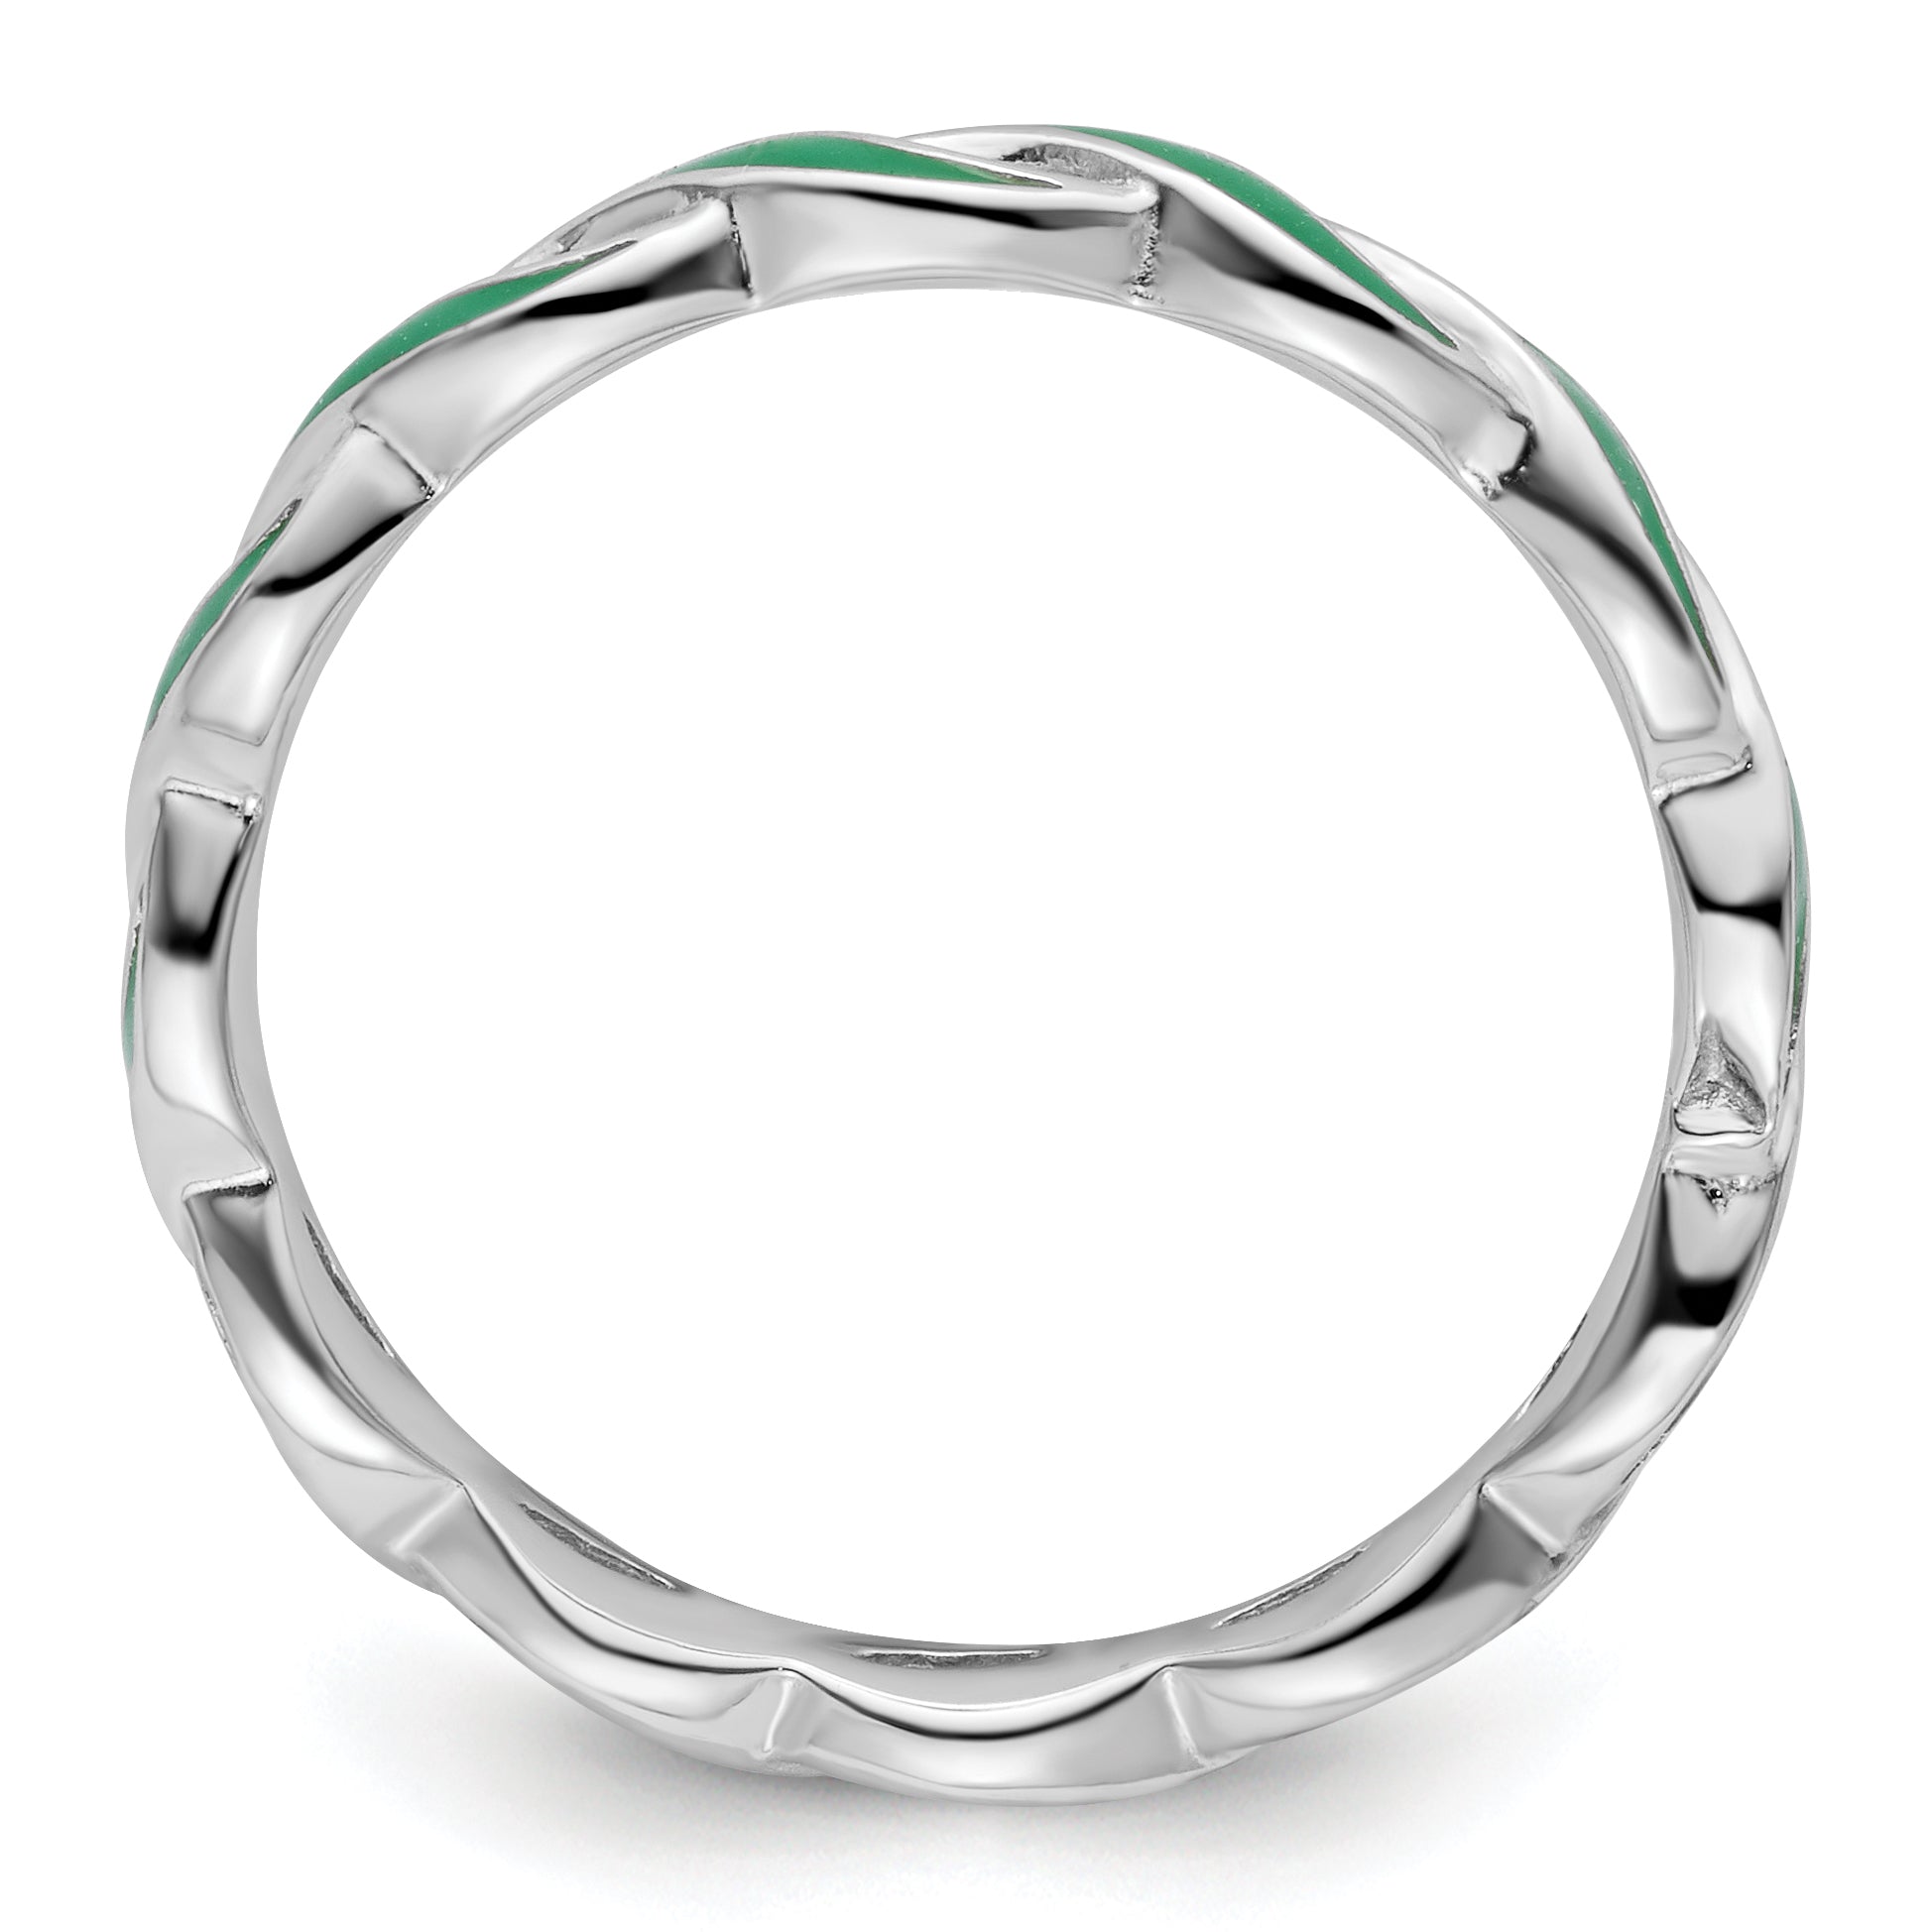 Sterling Silver Stackable Expressions Green Enamel Ring